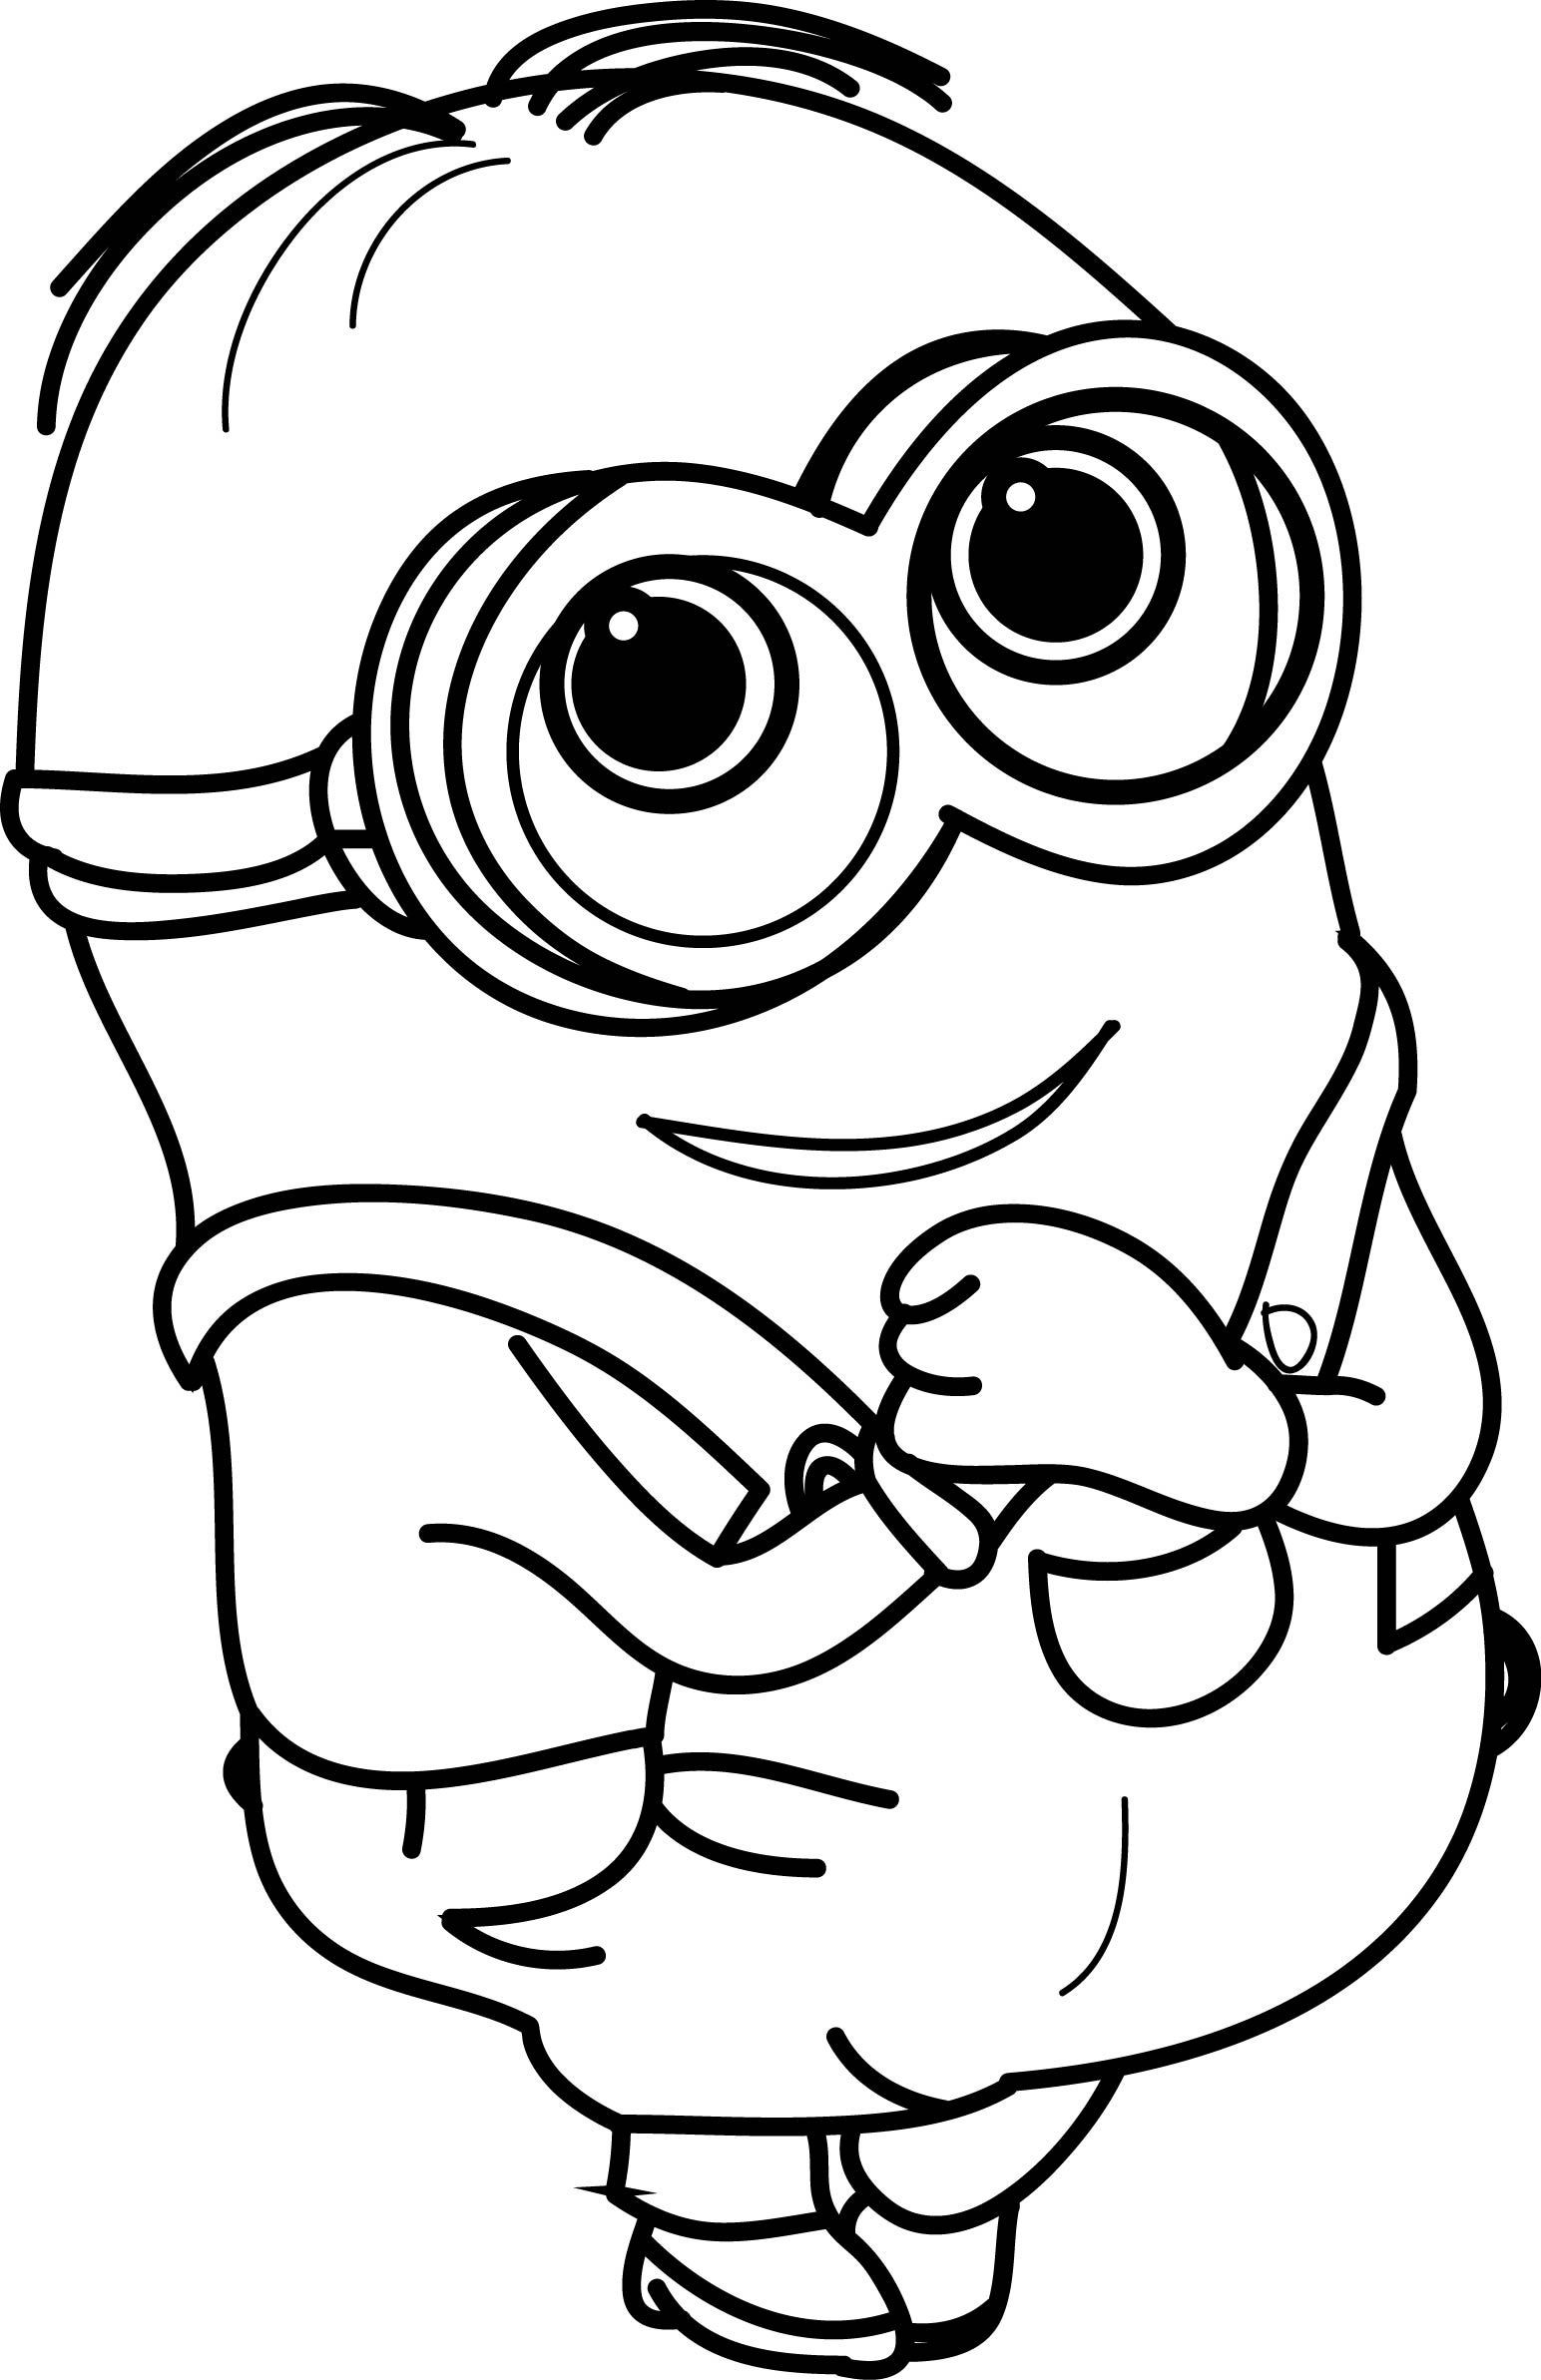 Cute Coloring Pages For Boys
 Minion Very Cute Coloring Page Minions